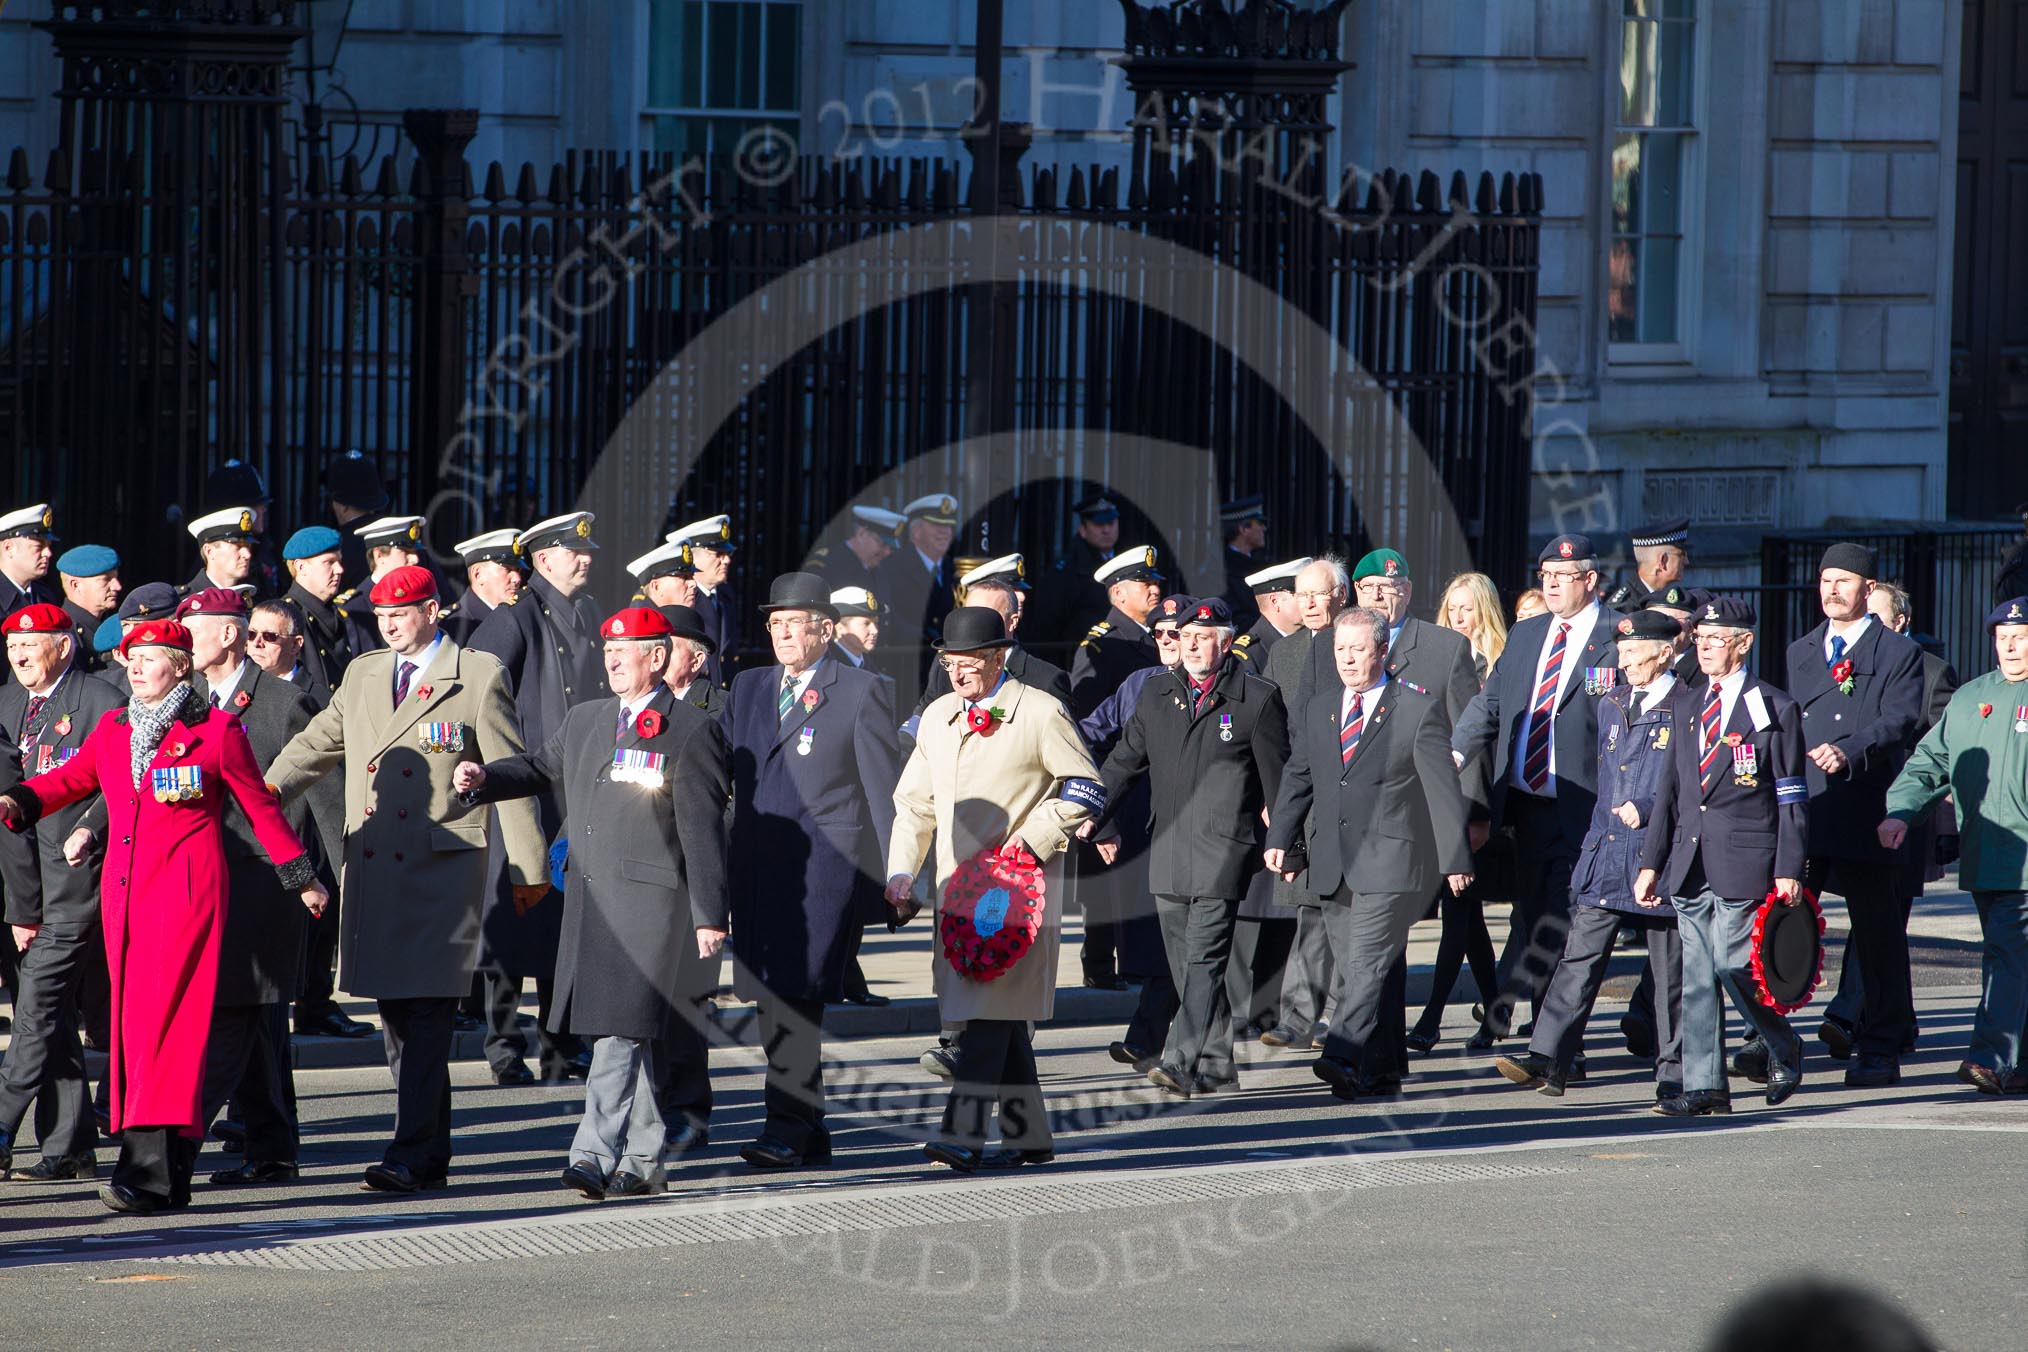 Remembrance Sunday 2012 Cenotaph March Past: Group B3, Royal Military Police Association, B4 - The RAEC and ETS Branch Association, and B5 - Royal Army Pay Corps Regimental Association..
Whitehall, Cenotaph,
London SW1,

United Kingdom,
on 11 November 2012 at 11:55, image #838